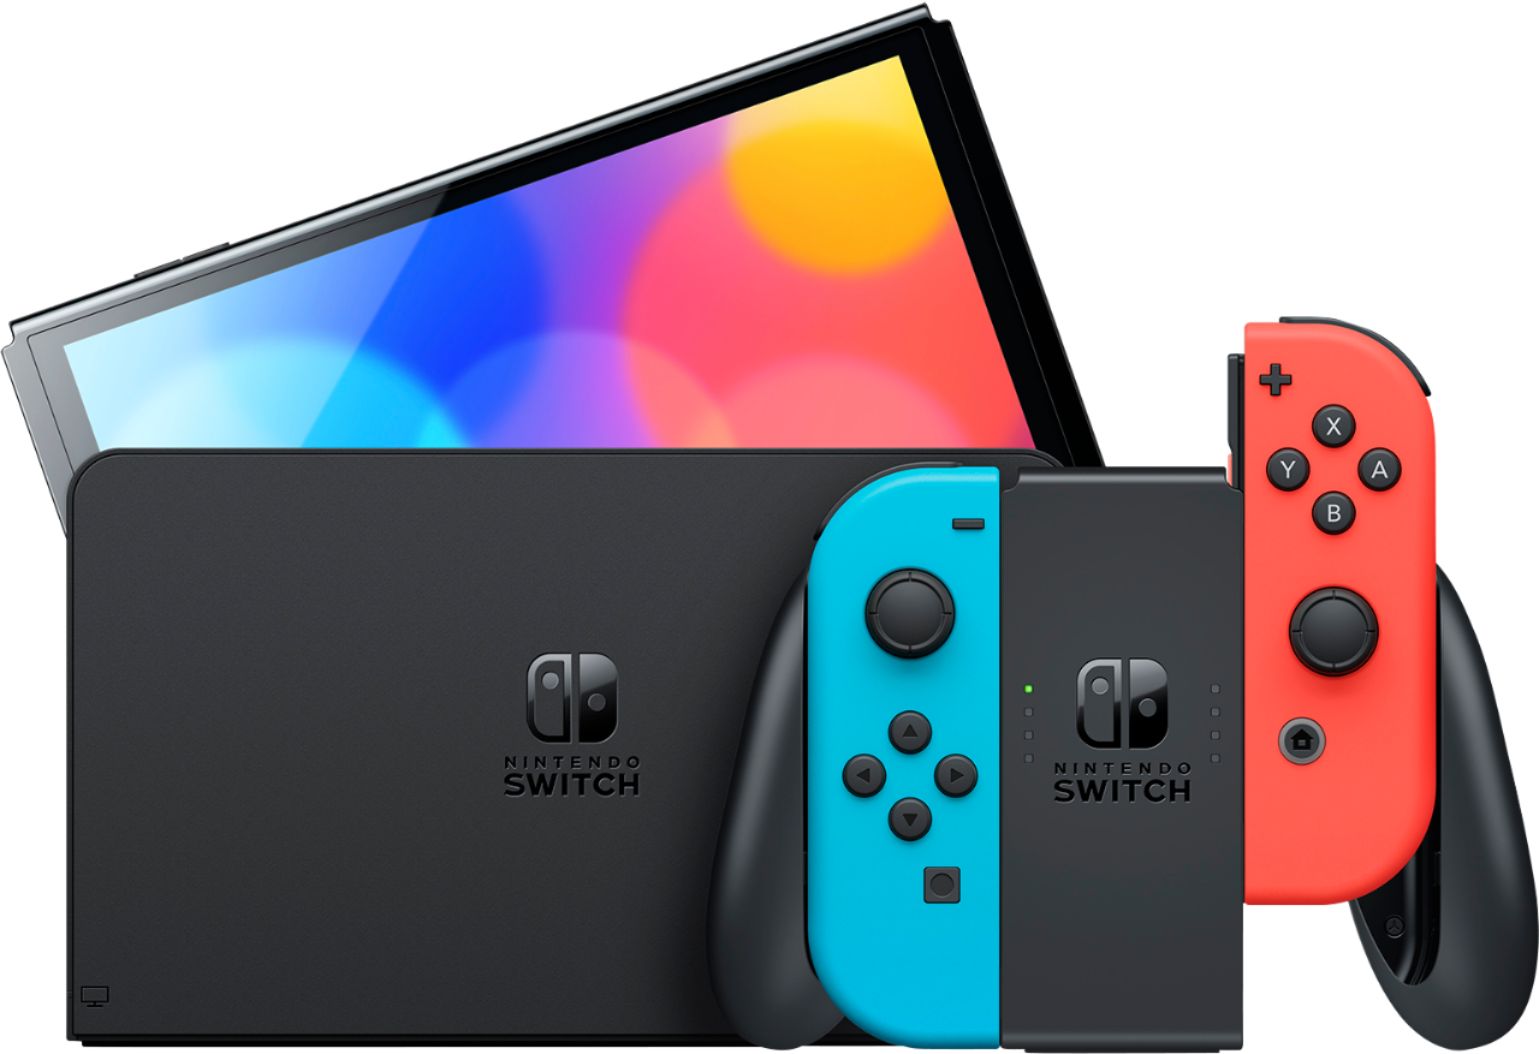 2021 New Nintendo Switch OLED Model Neon Red & Blue Joy Con 64GB Console HD Screen & LAN-Port Dock with Just Dance 2022 And Mytrix Joystick Caps & Screen Protector